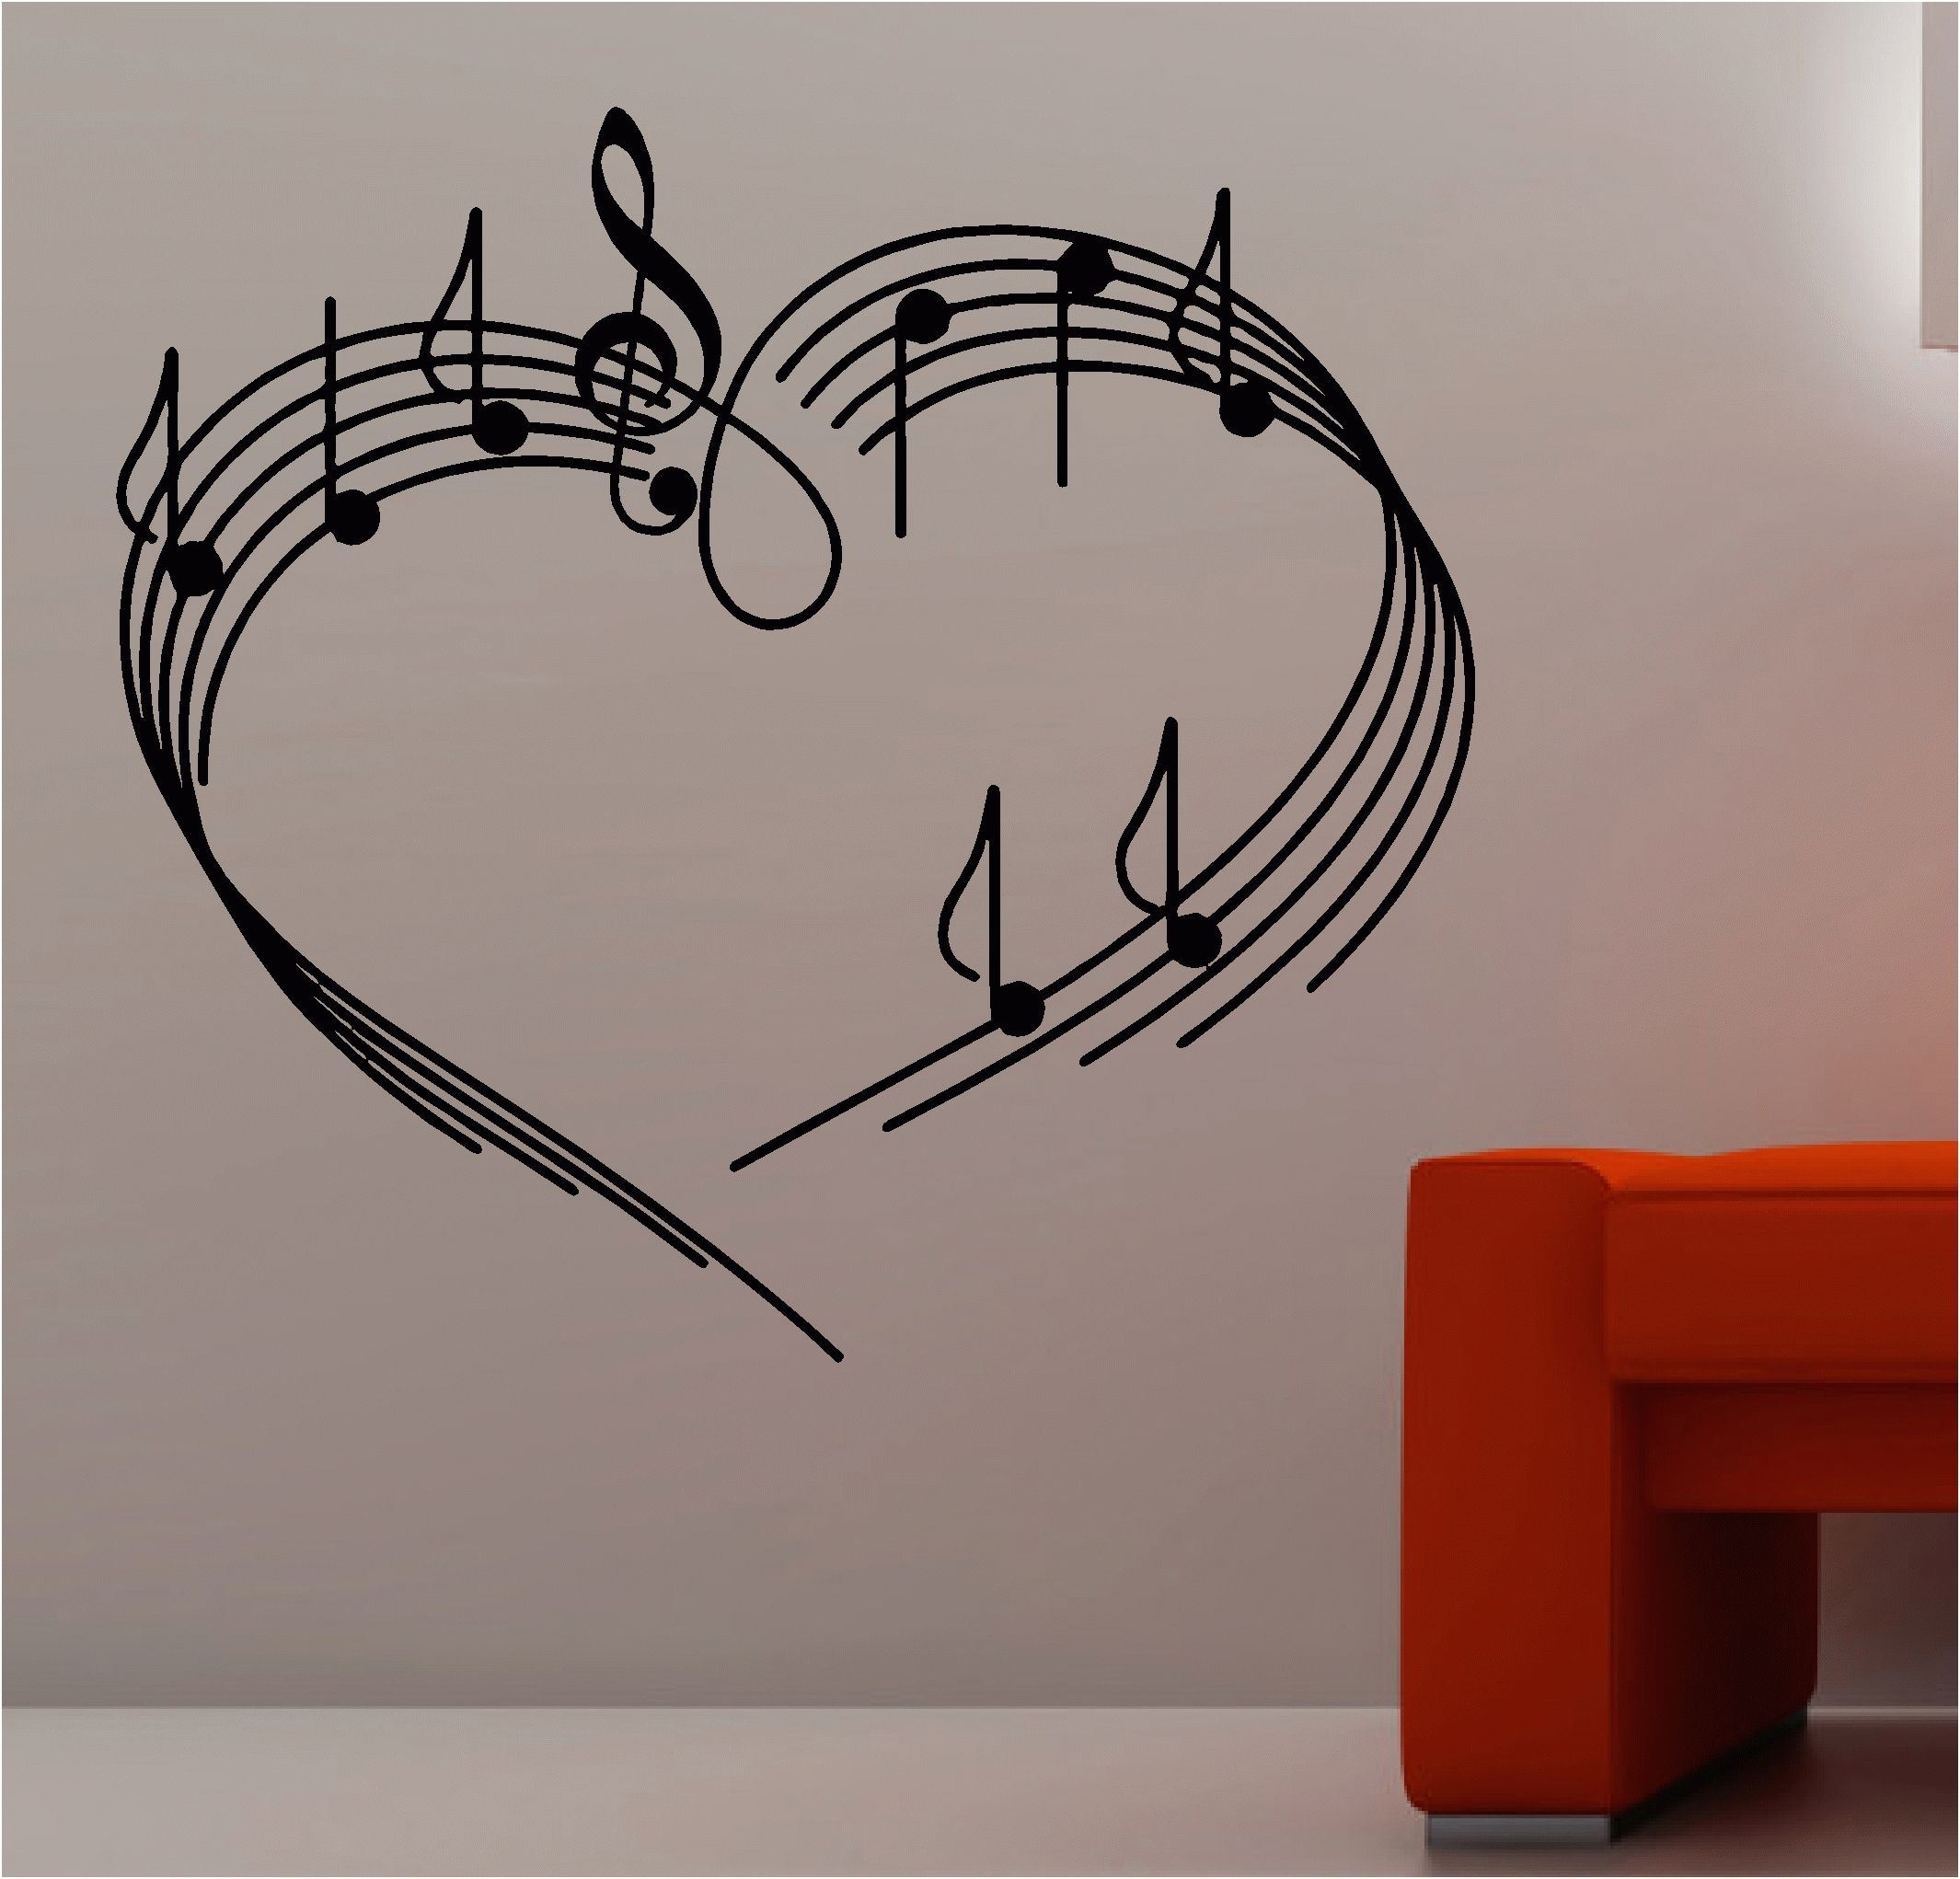 Music Note Wall Art Decor Within Recent Inspiring Design Ideas Musical Wall Art With Music Notes As A (View 6 of 15)